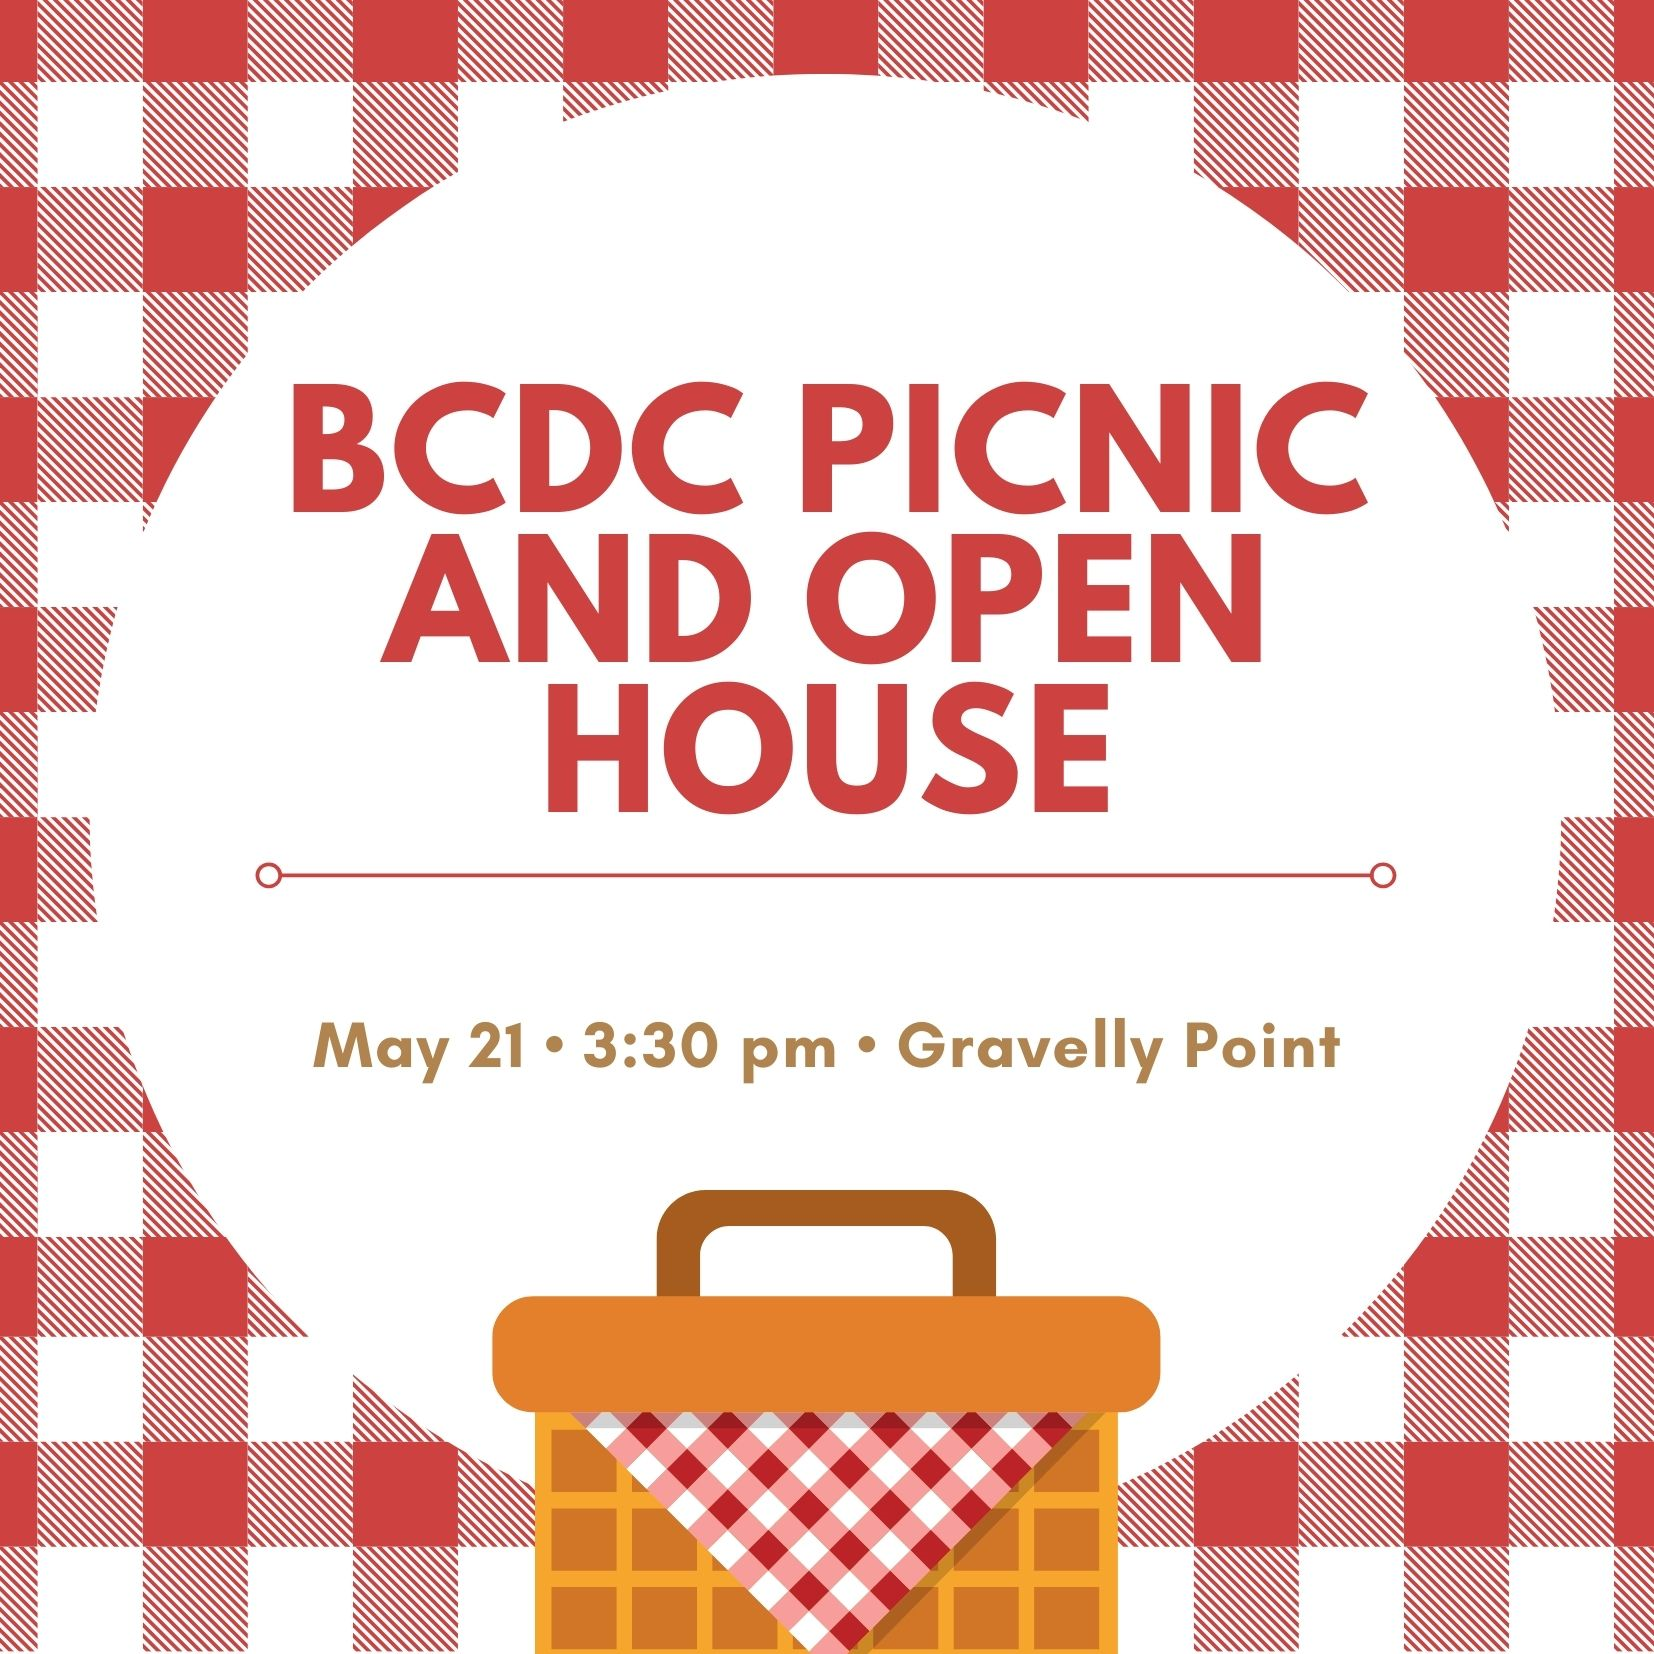 BCDC Picnic and Open House